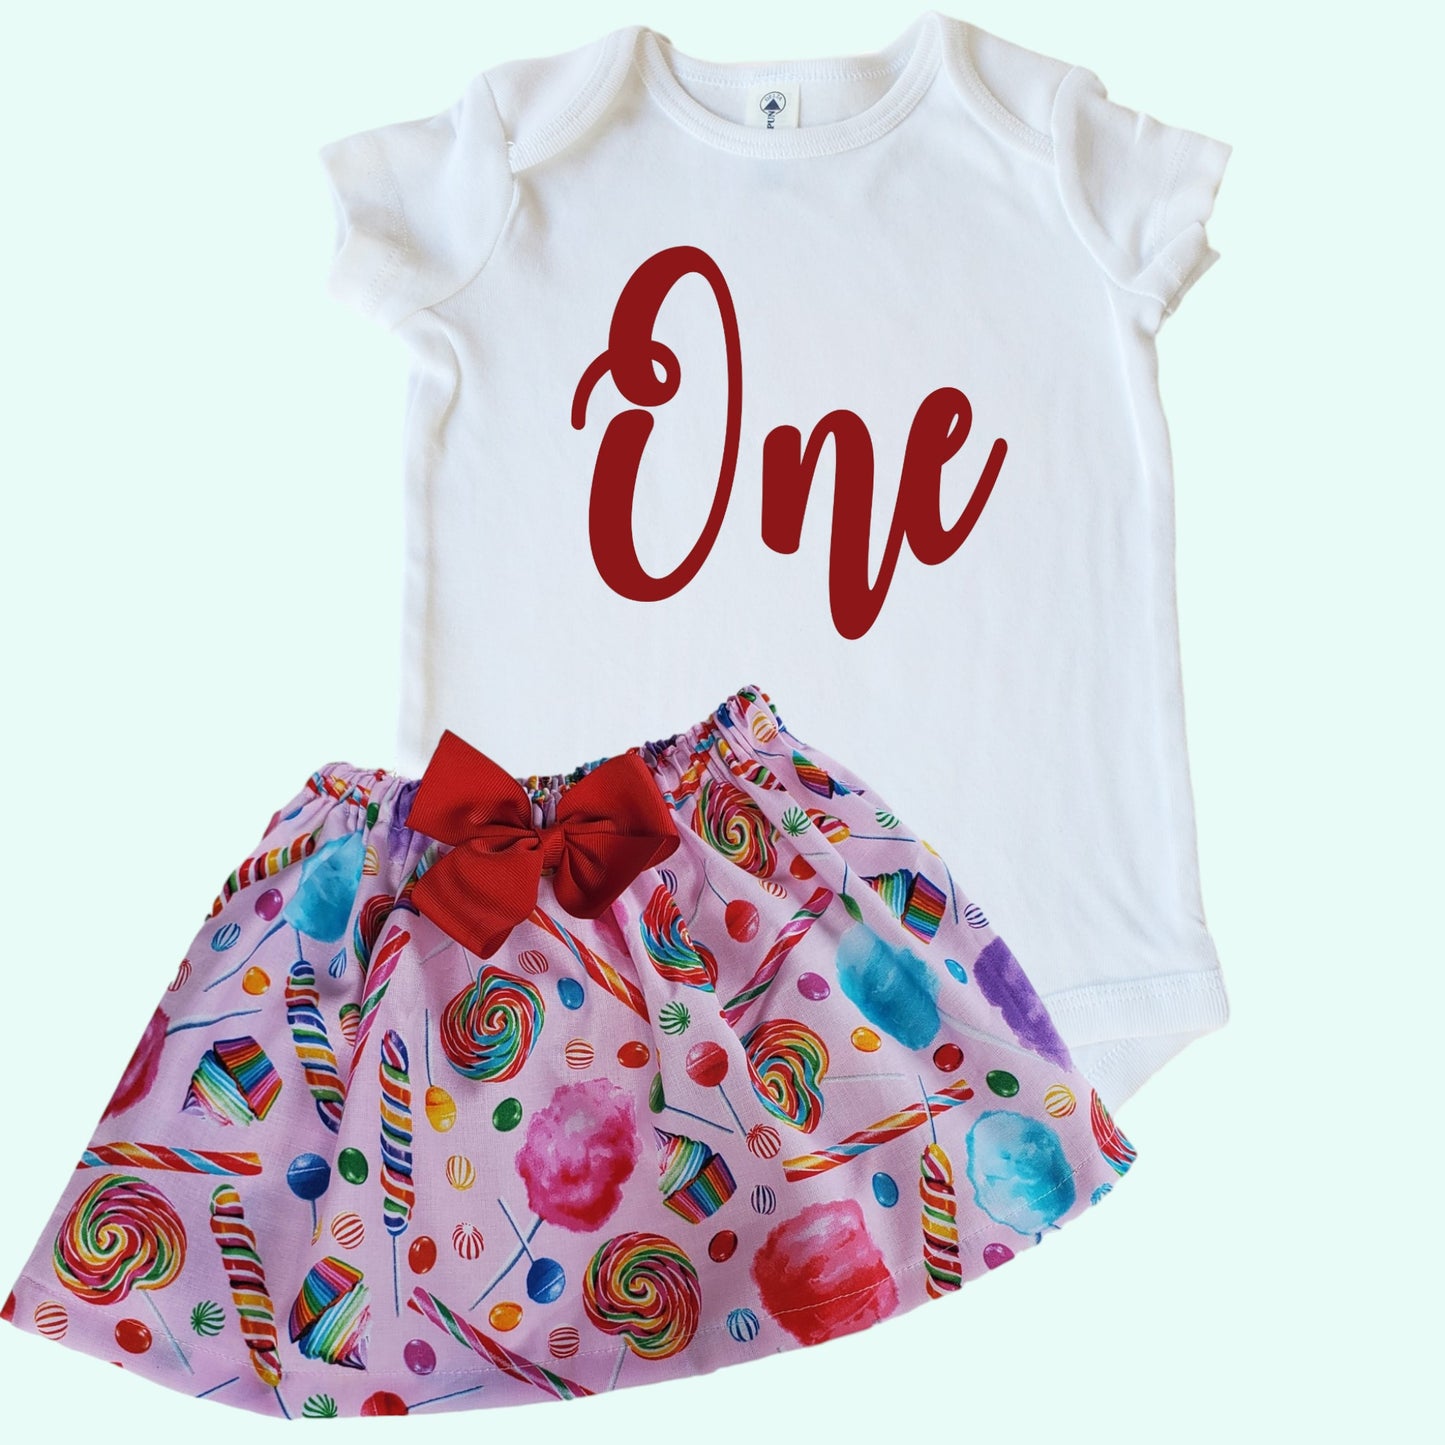 Candyland birthday outfit | Girls onesies outfit | Candy pink skirt outfit | Girls outfit | Girls First Birthday Outfit